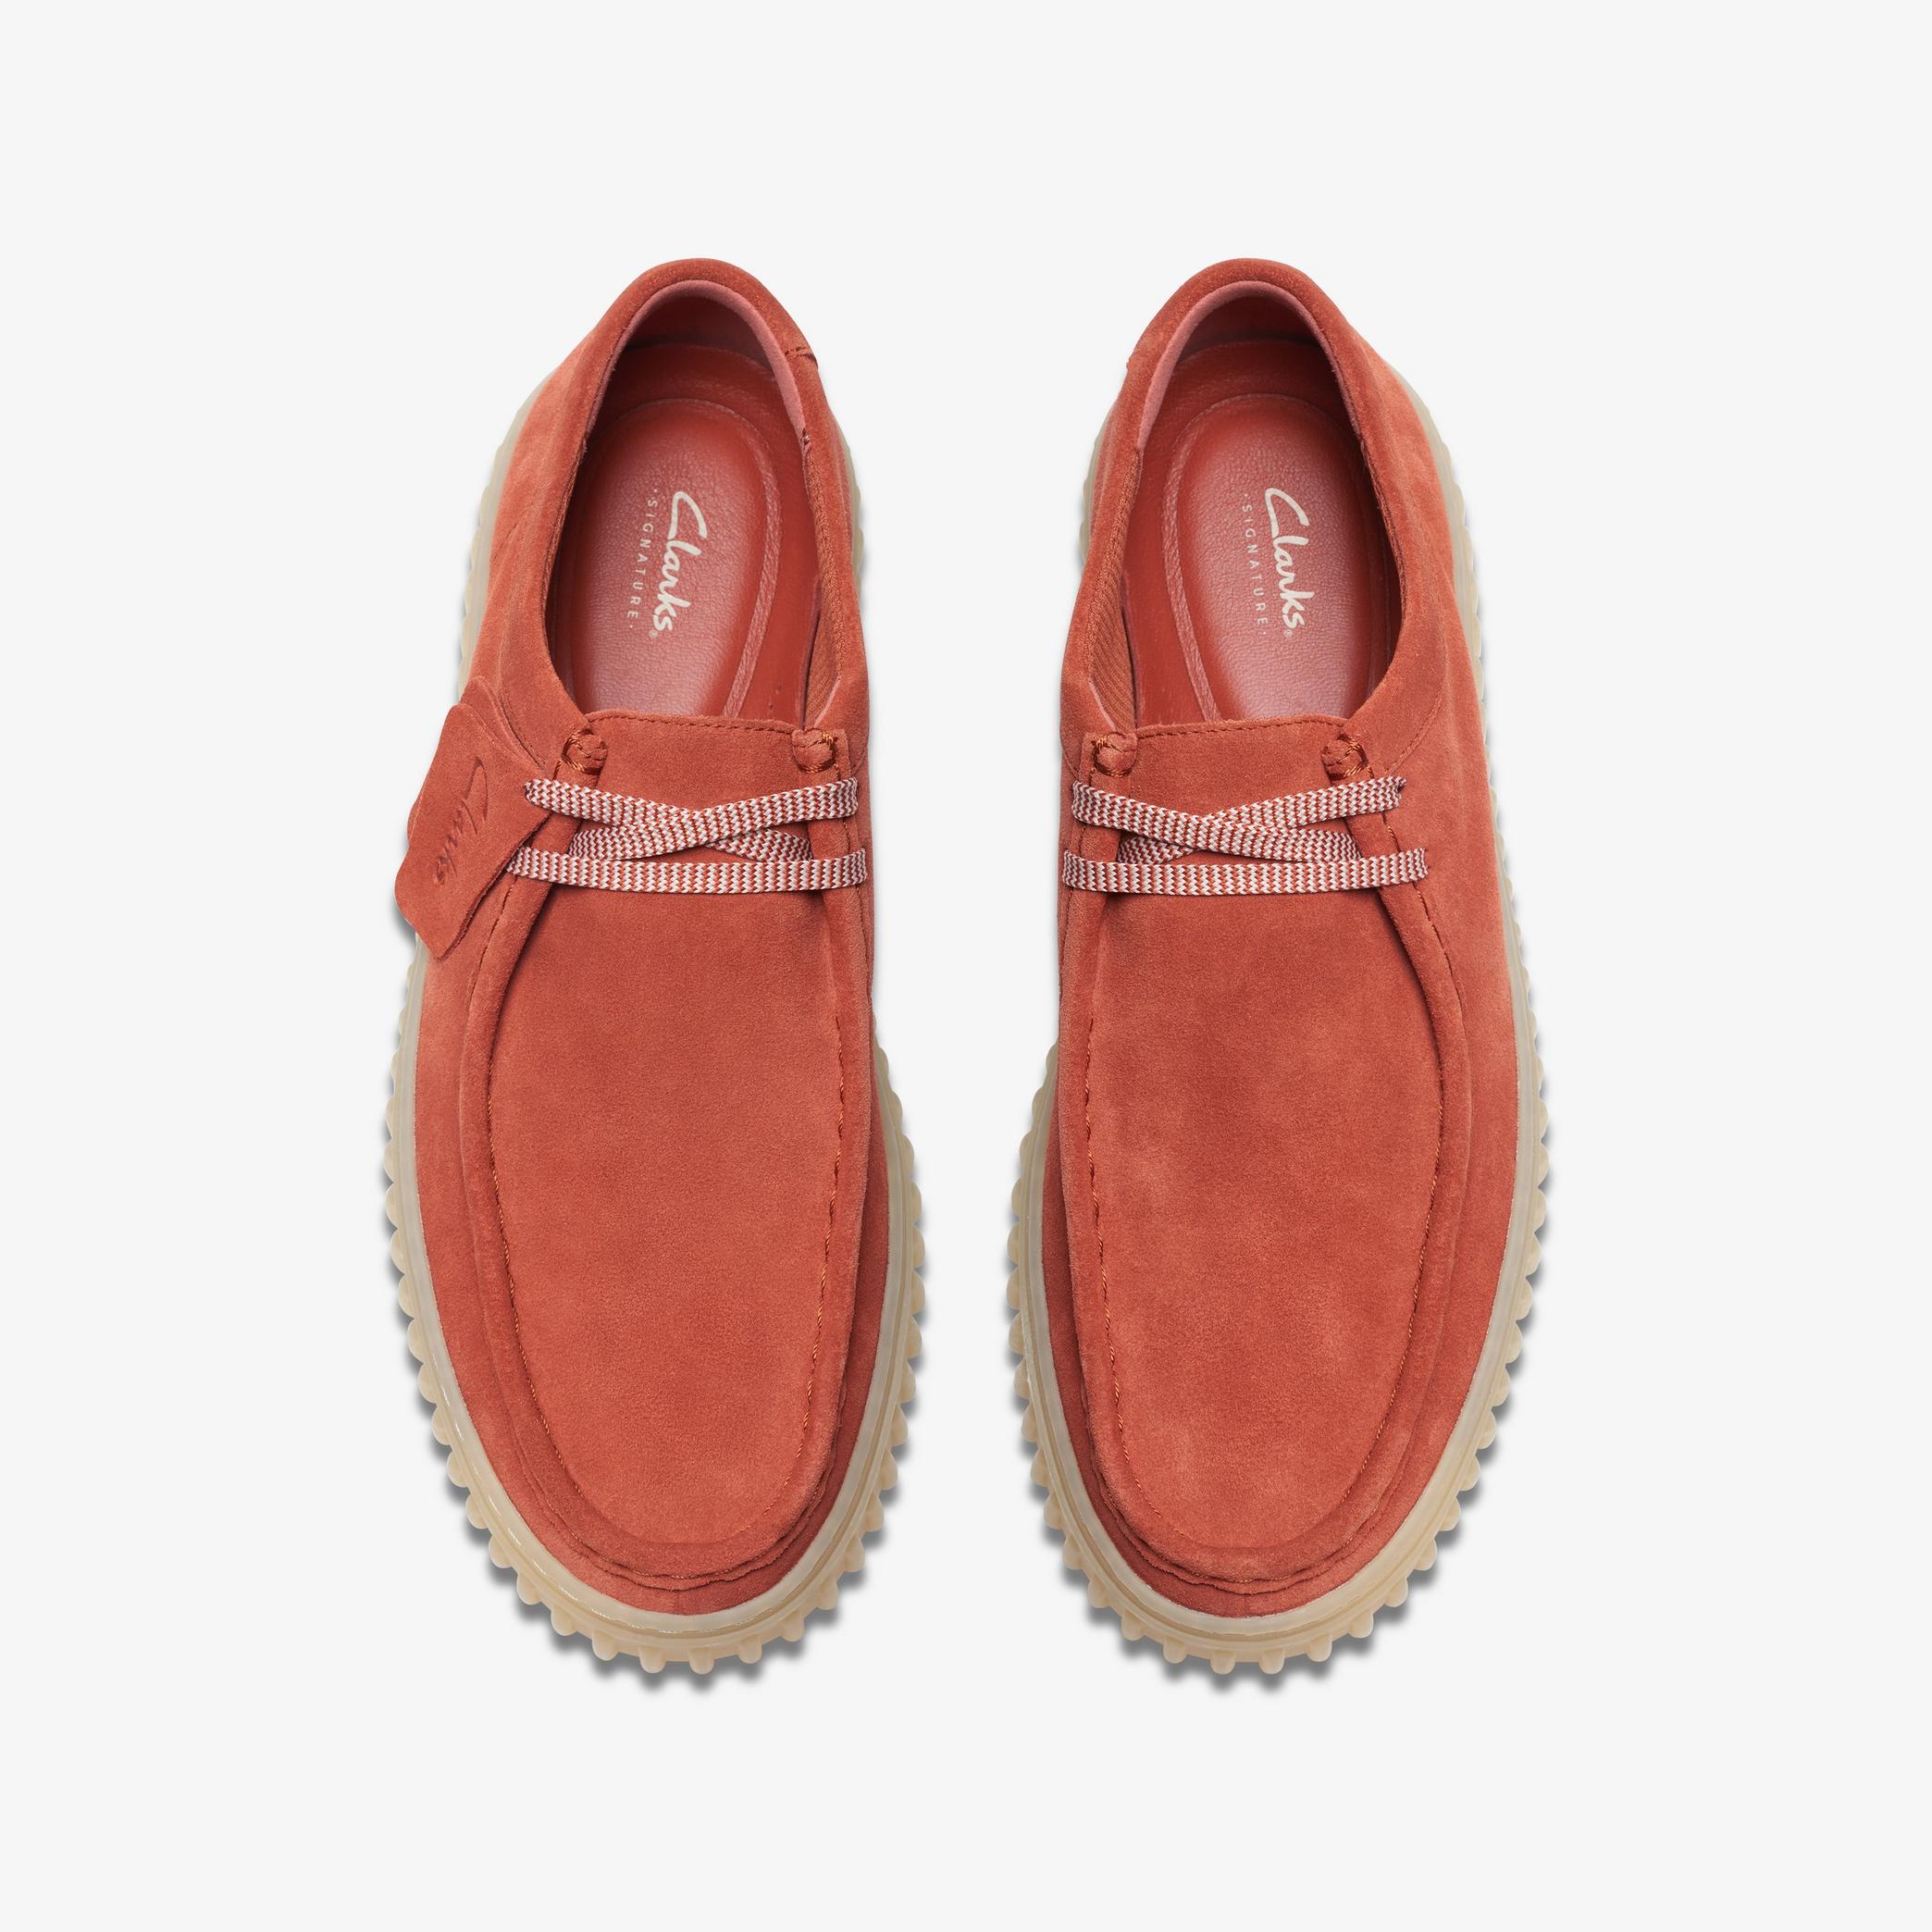 Torhill Lo Rust Suede Moccasins, view 6 of 6